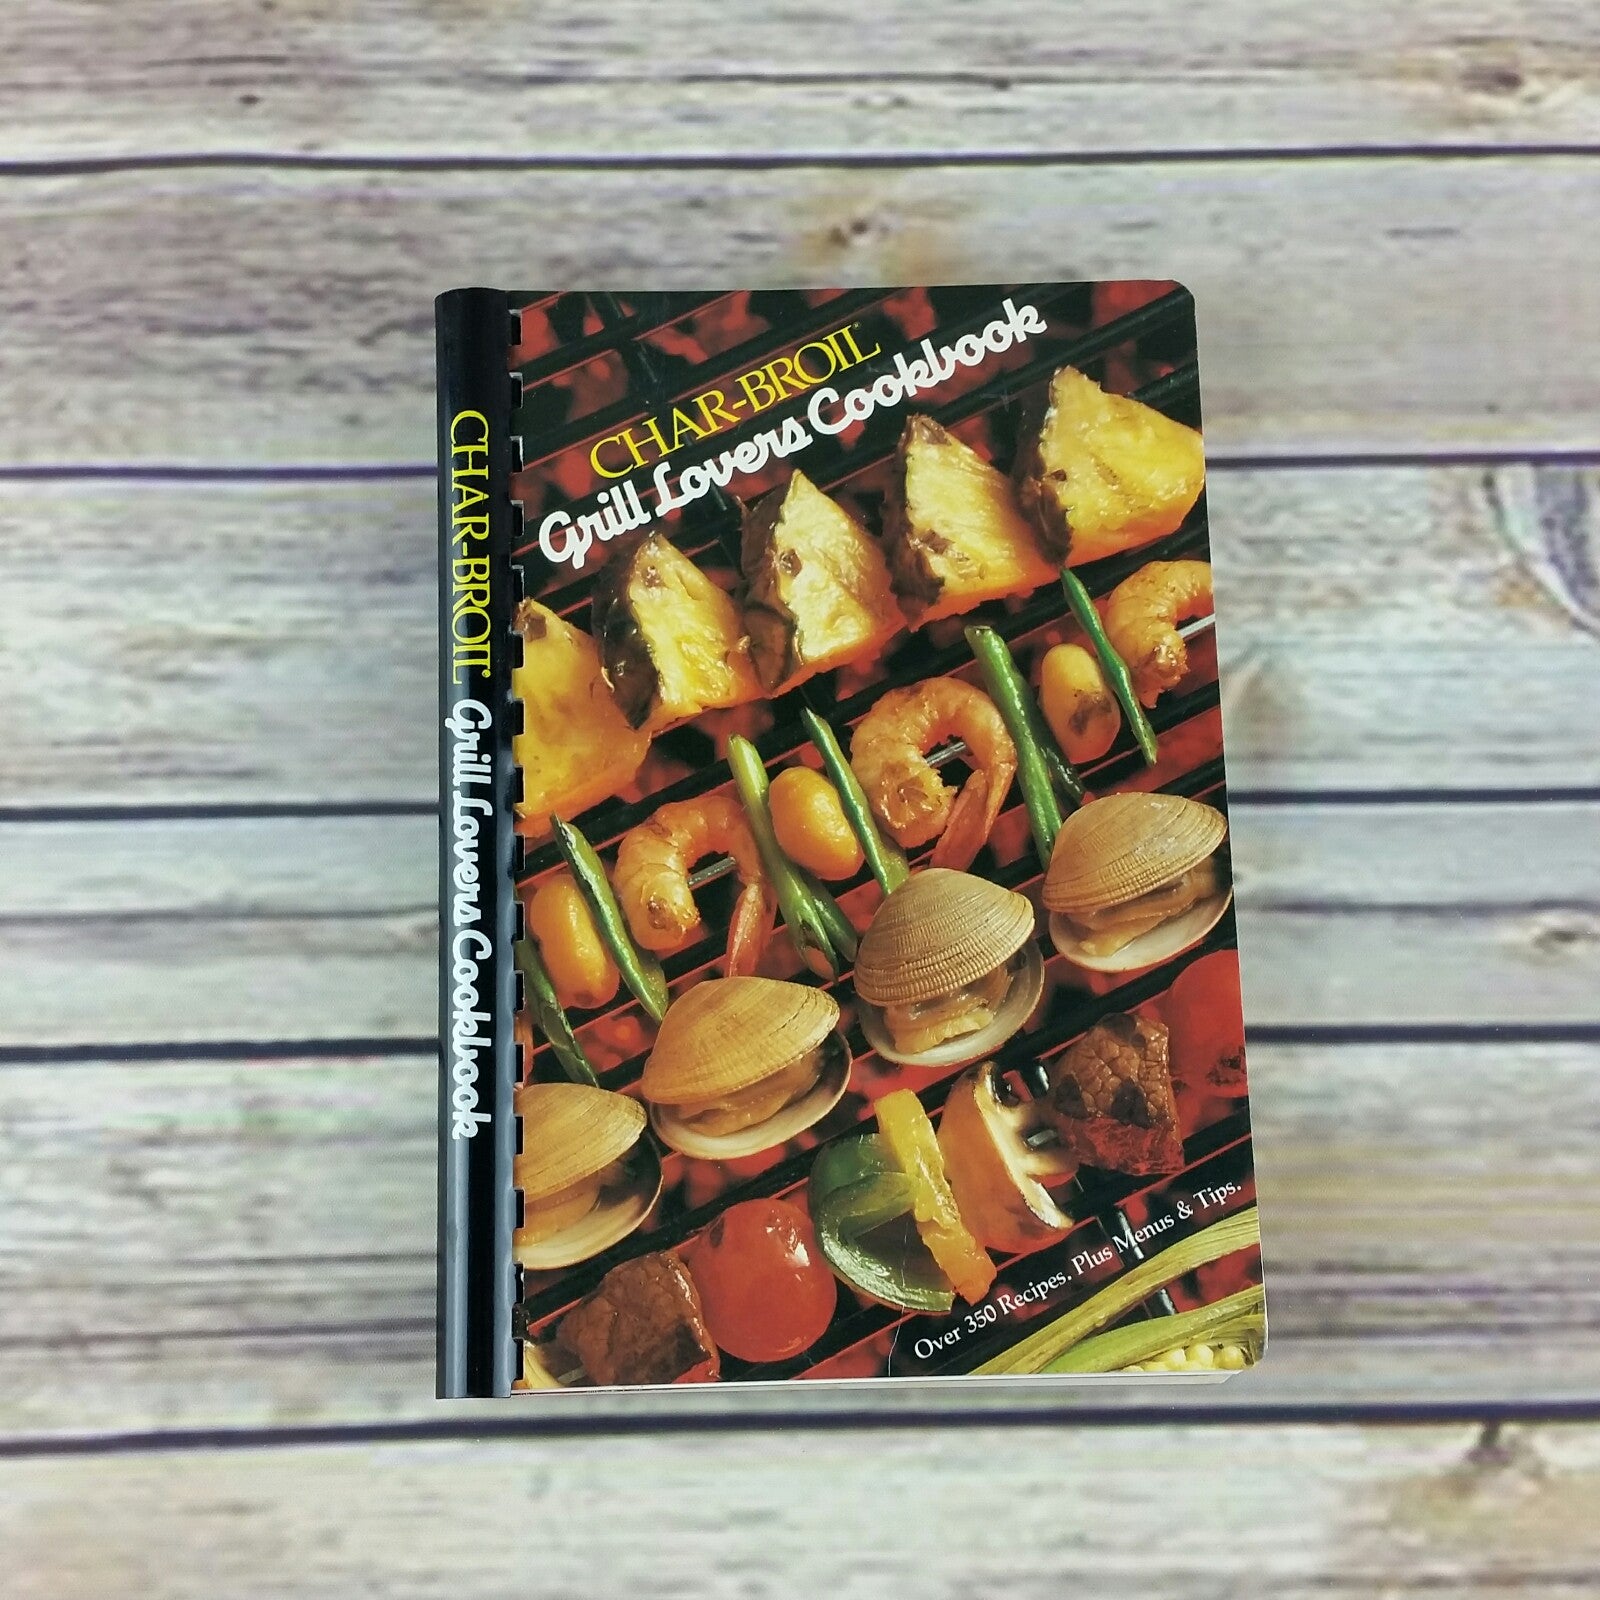 Vintage Char Broil Cookbook Grill Lovers 350 BBQ Recipes 1985 - At Grandma's Table